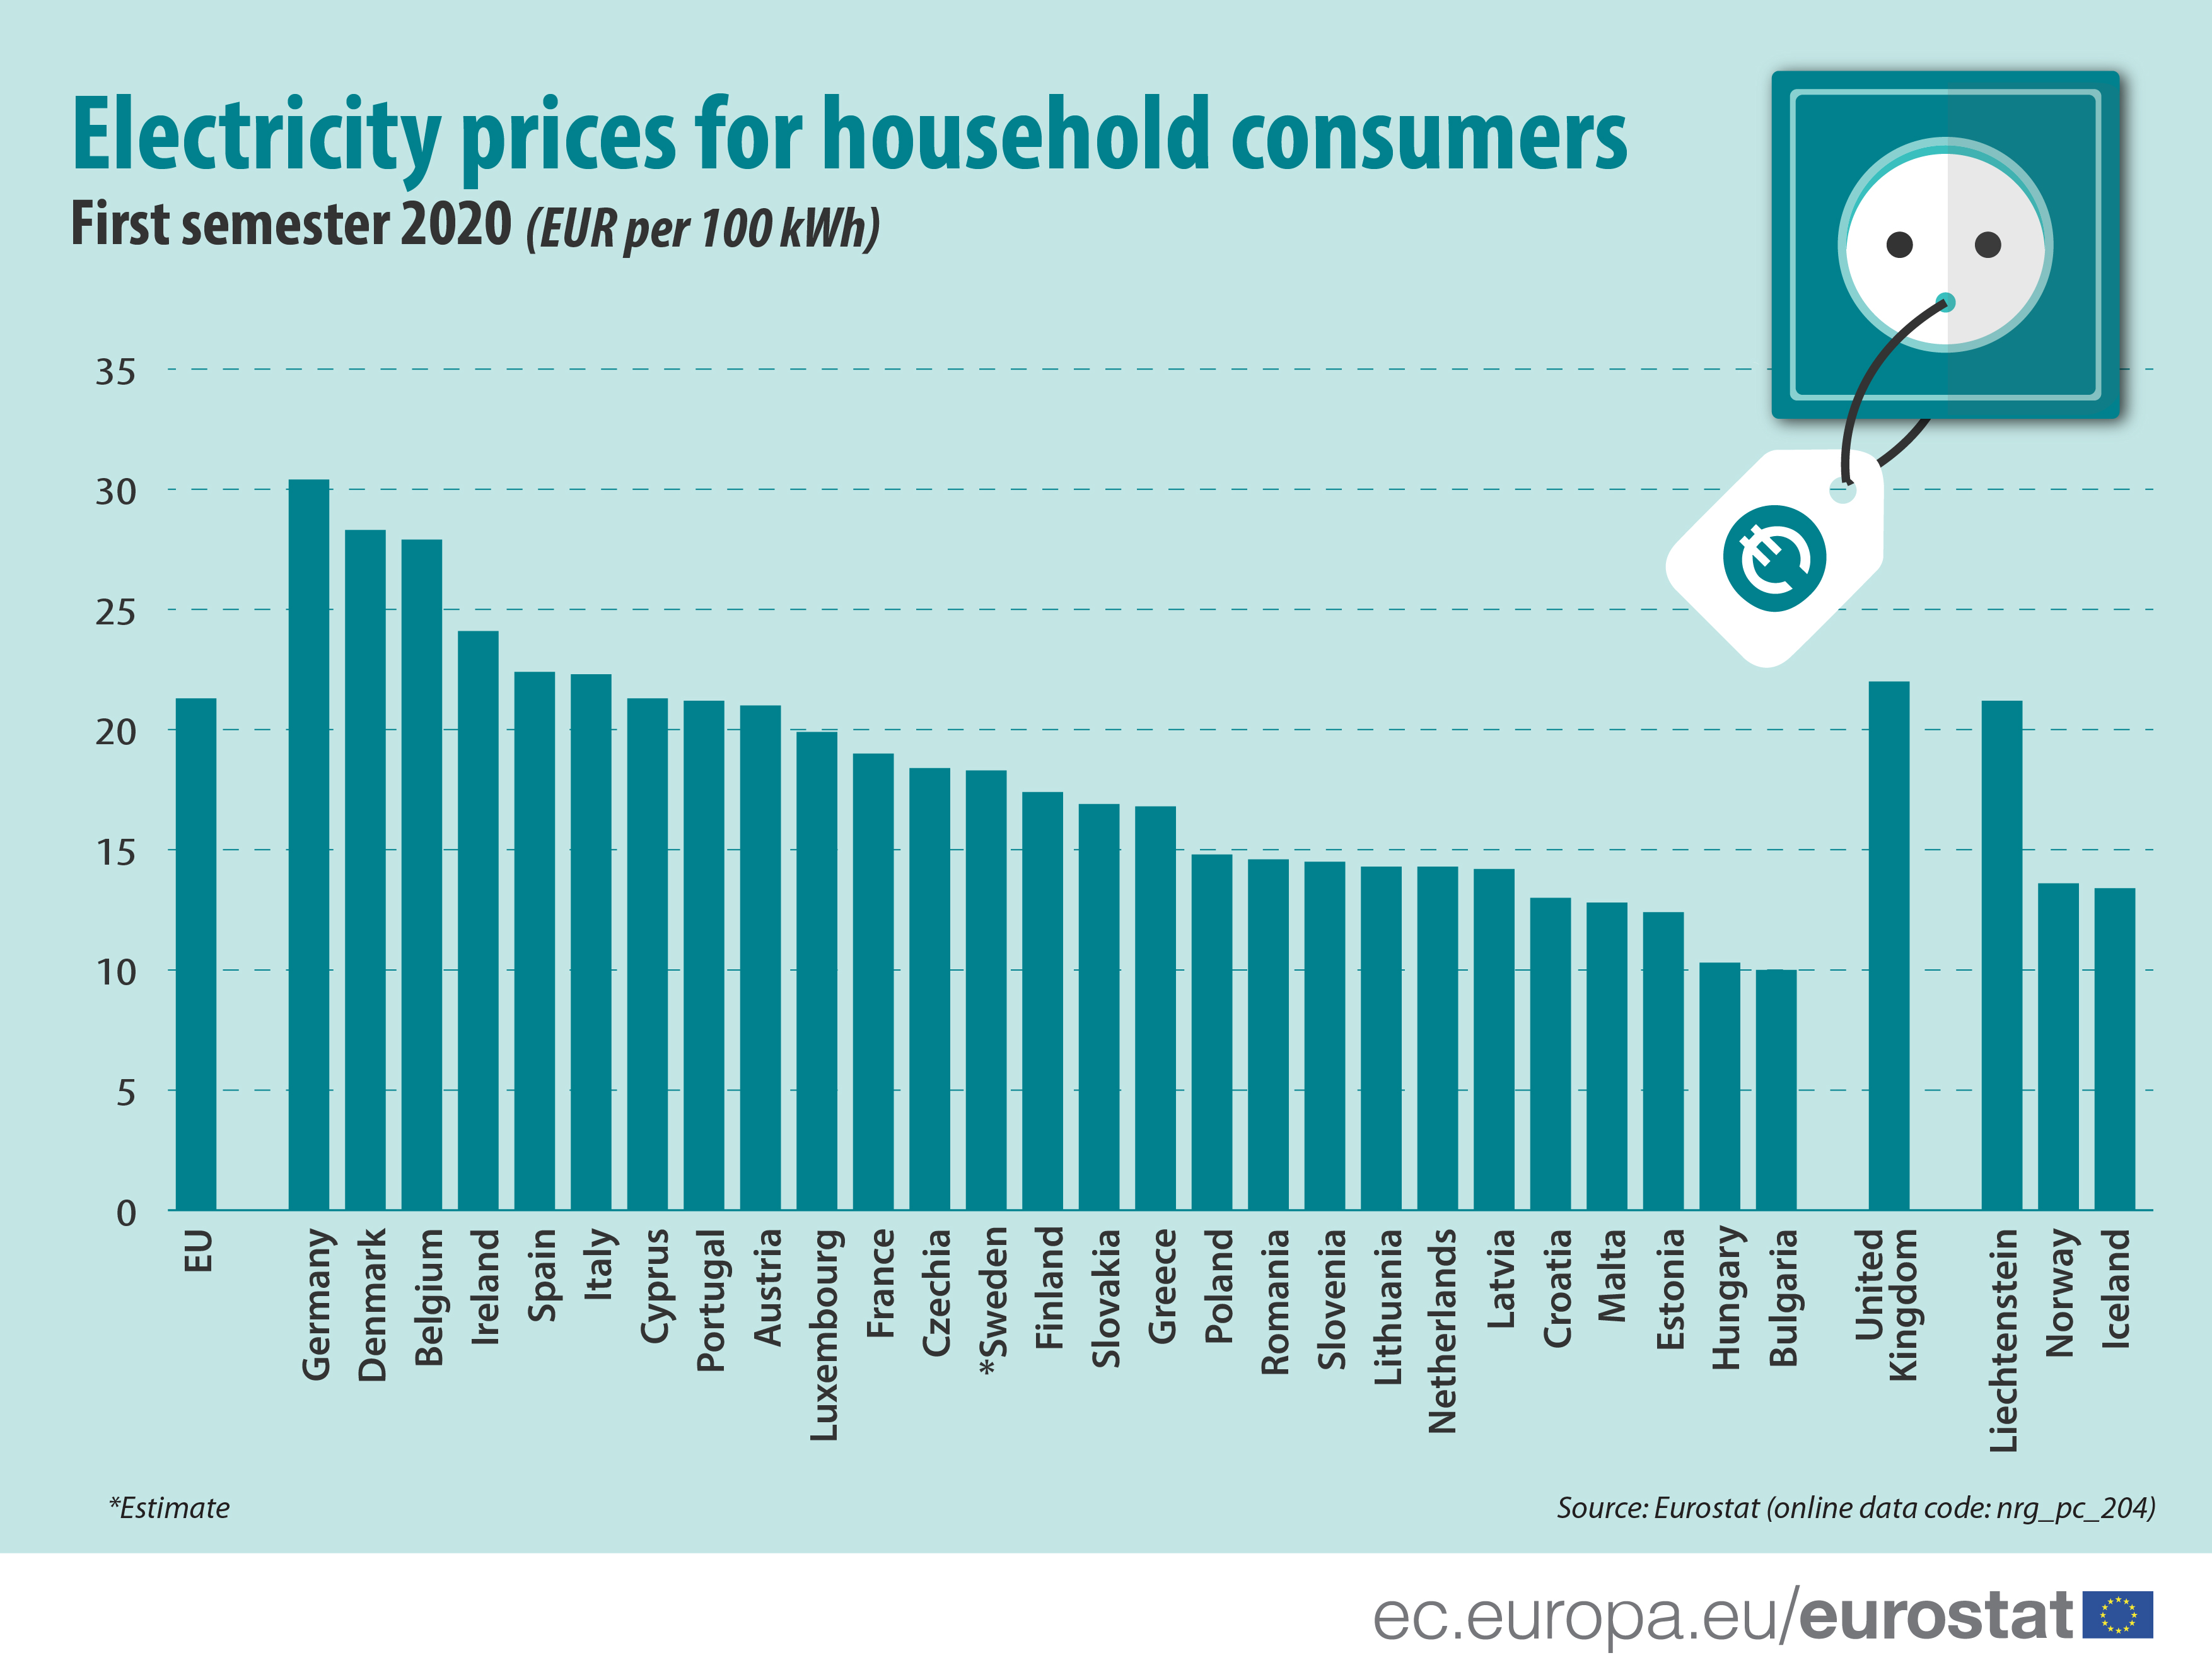 Electricity prices for household consumers - First semester 2020